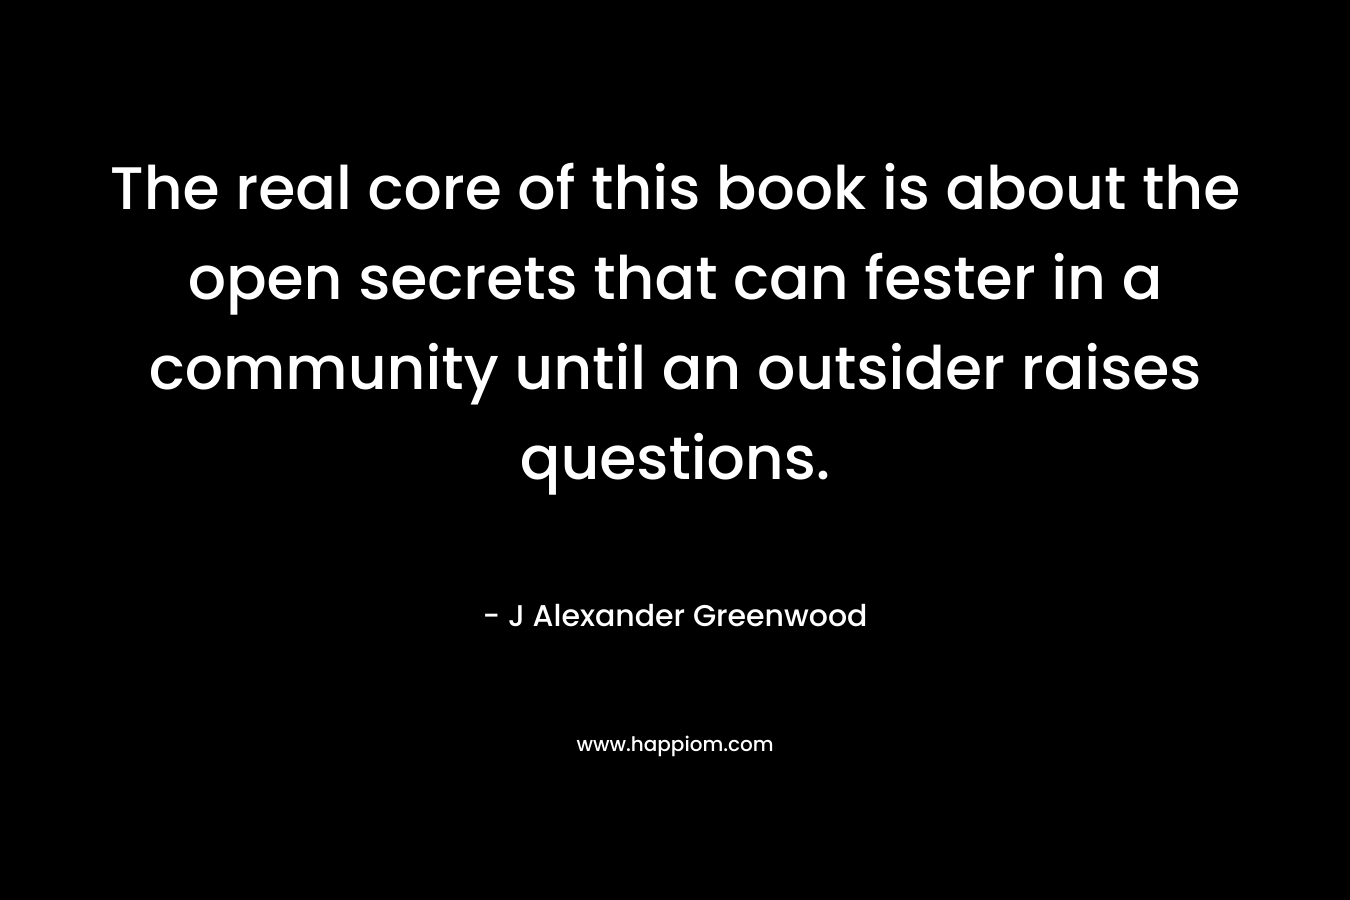 The real core of this book is about the open secrets that can fester in a community until an outsider raises questions. – J Alexander Greenwood